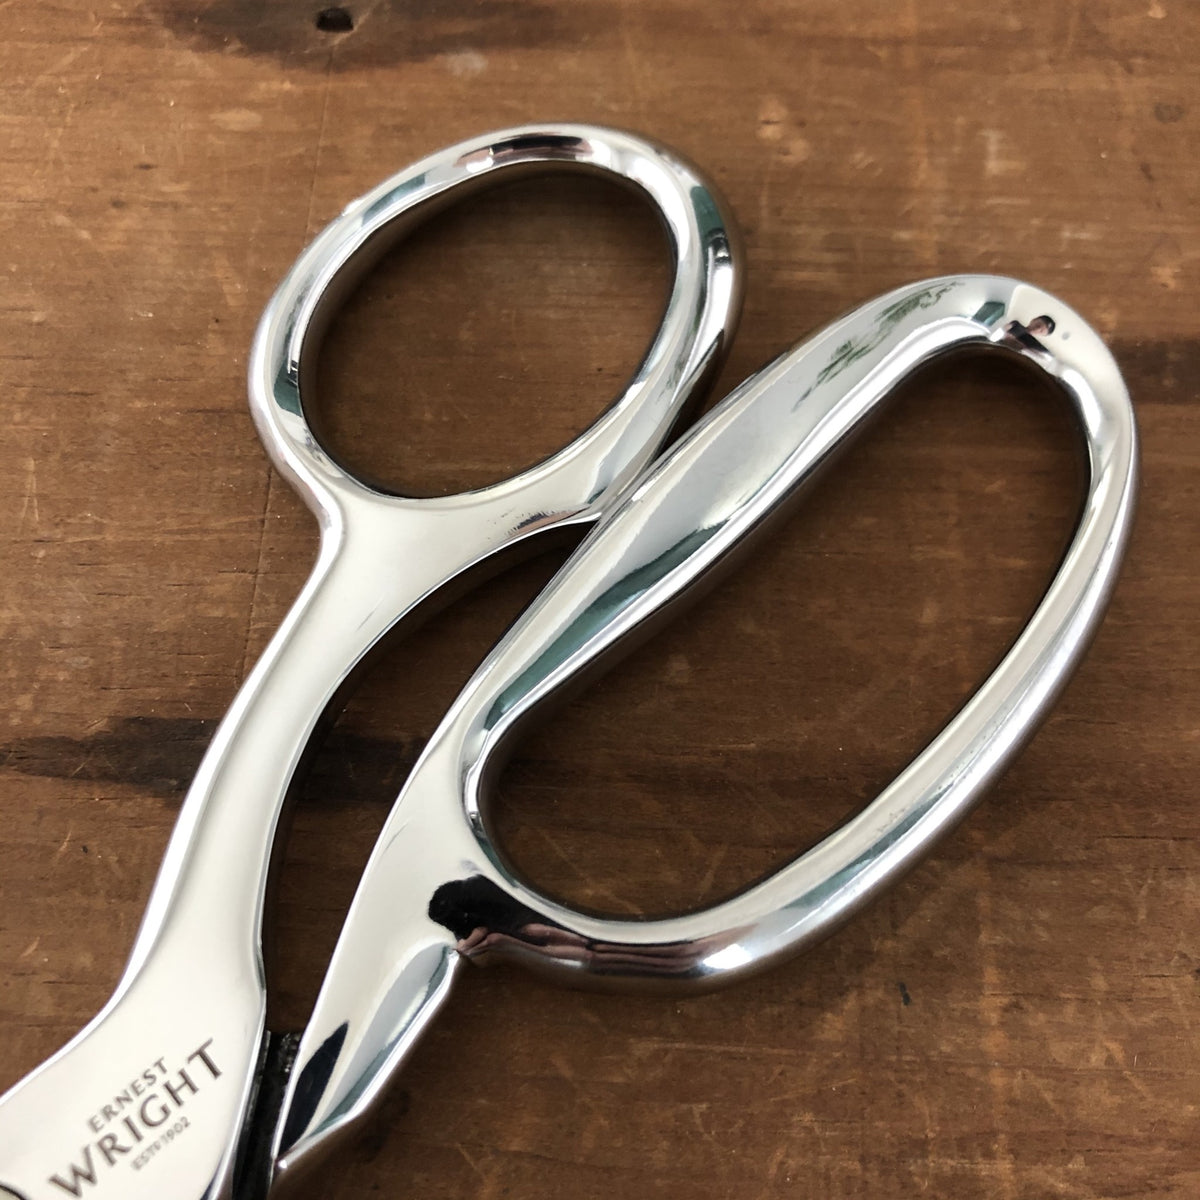 Dressmakers Scissors Handmade by Ernest Wright and Son in